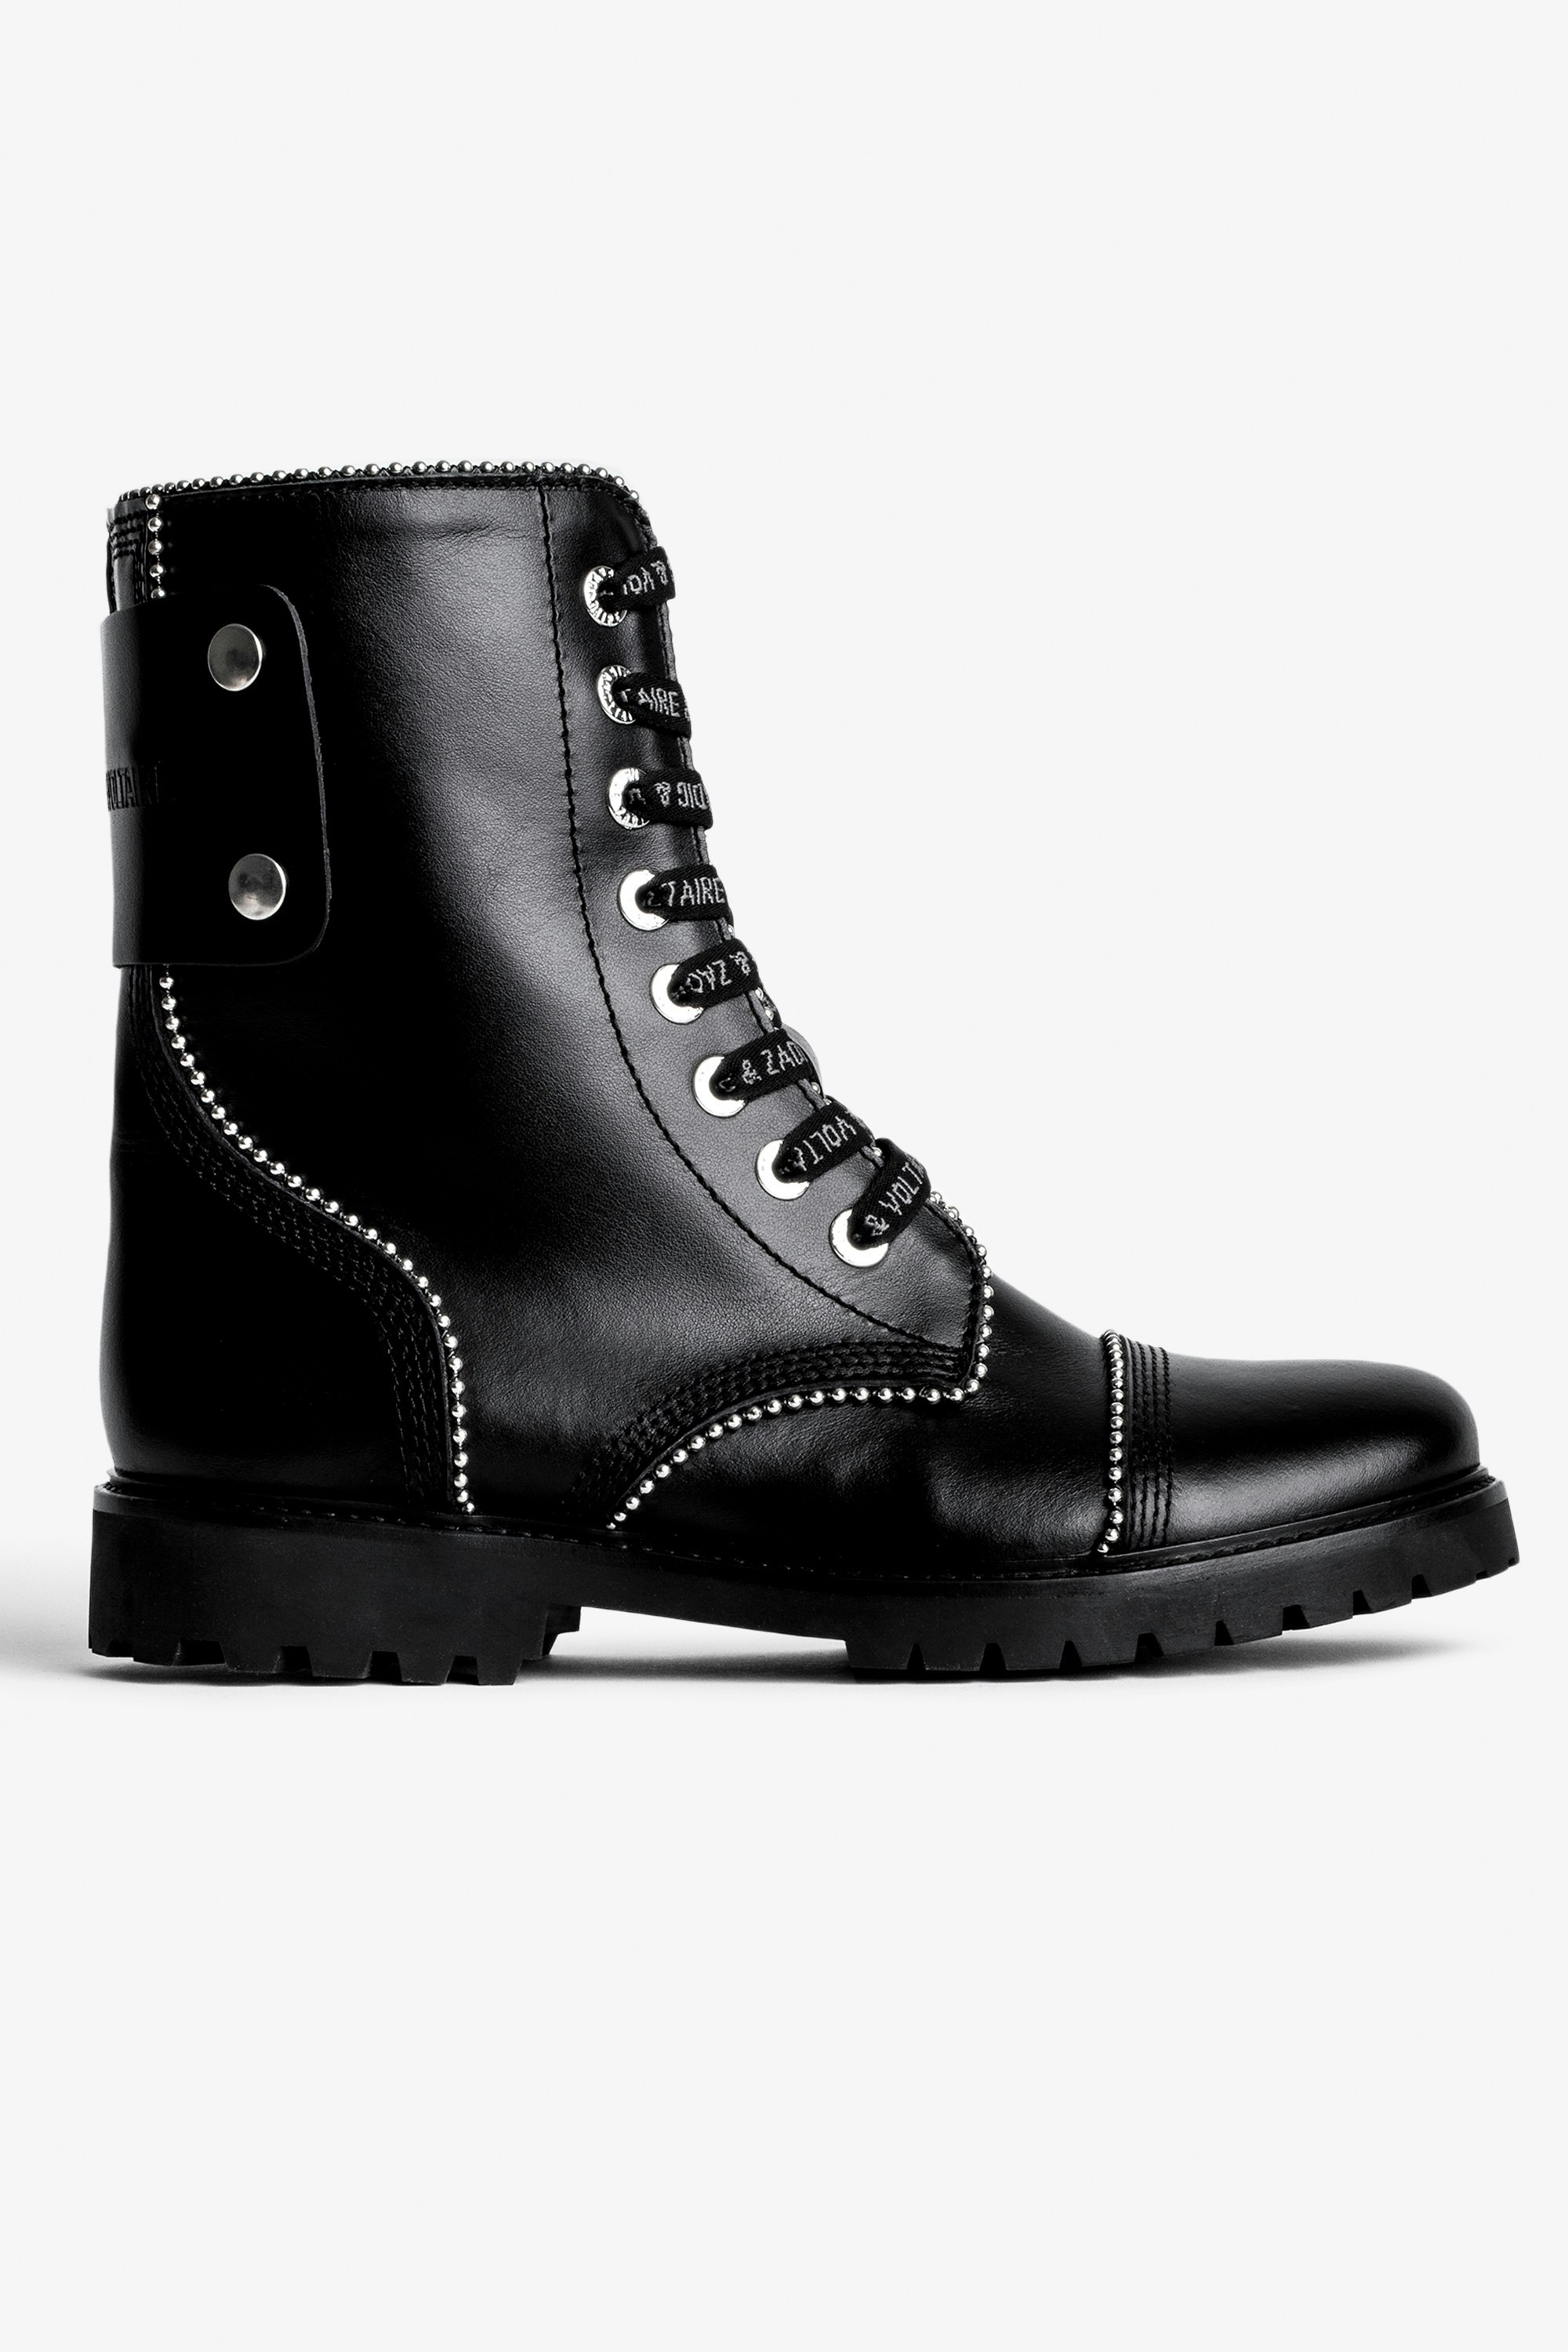 Joe Ankle Boots Leather - Women's studded smooth black leather combat boots